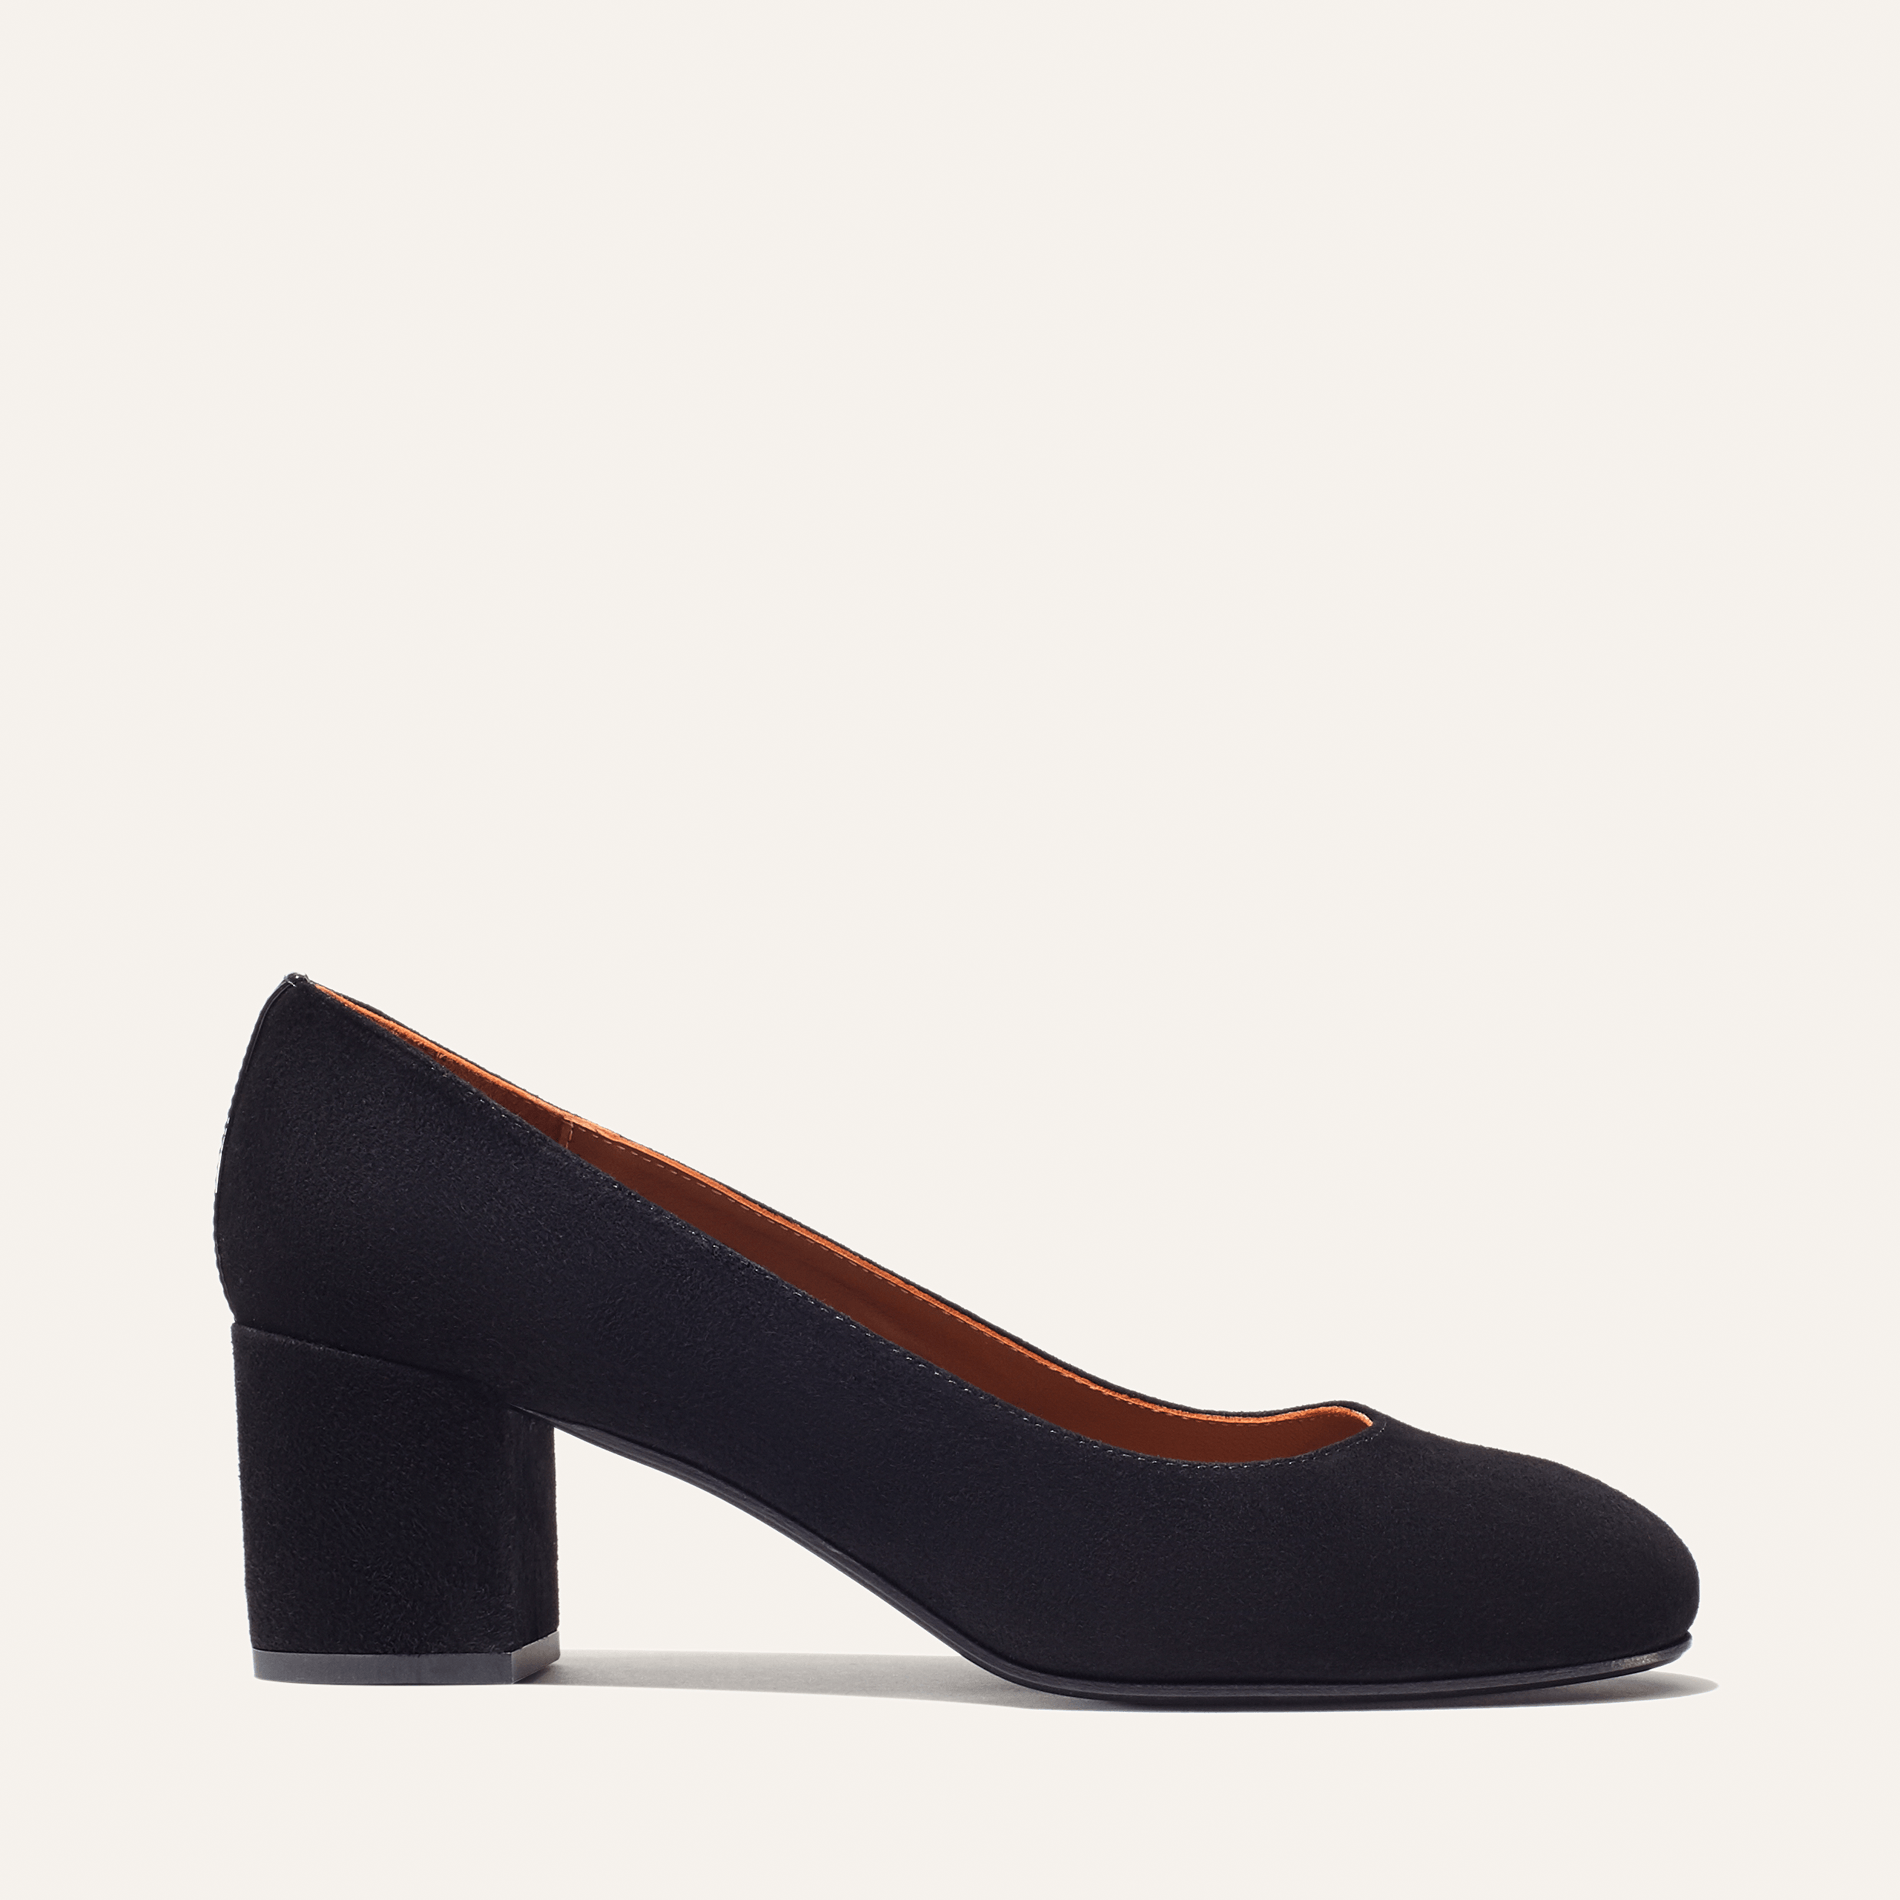 9 Comfortable Pumps You Can Walk In Confidently For Hours [Guide] — The Most  Comfortable Heels